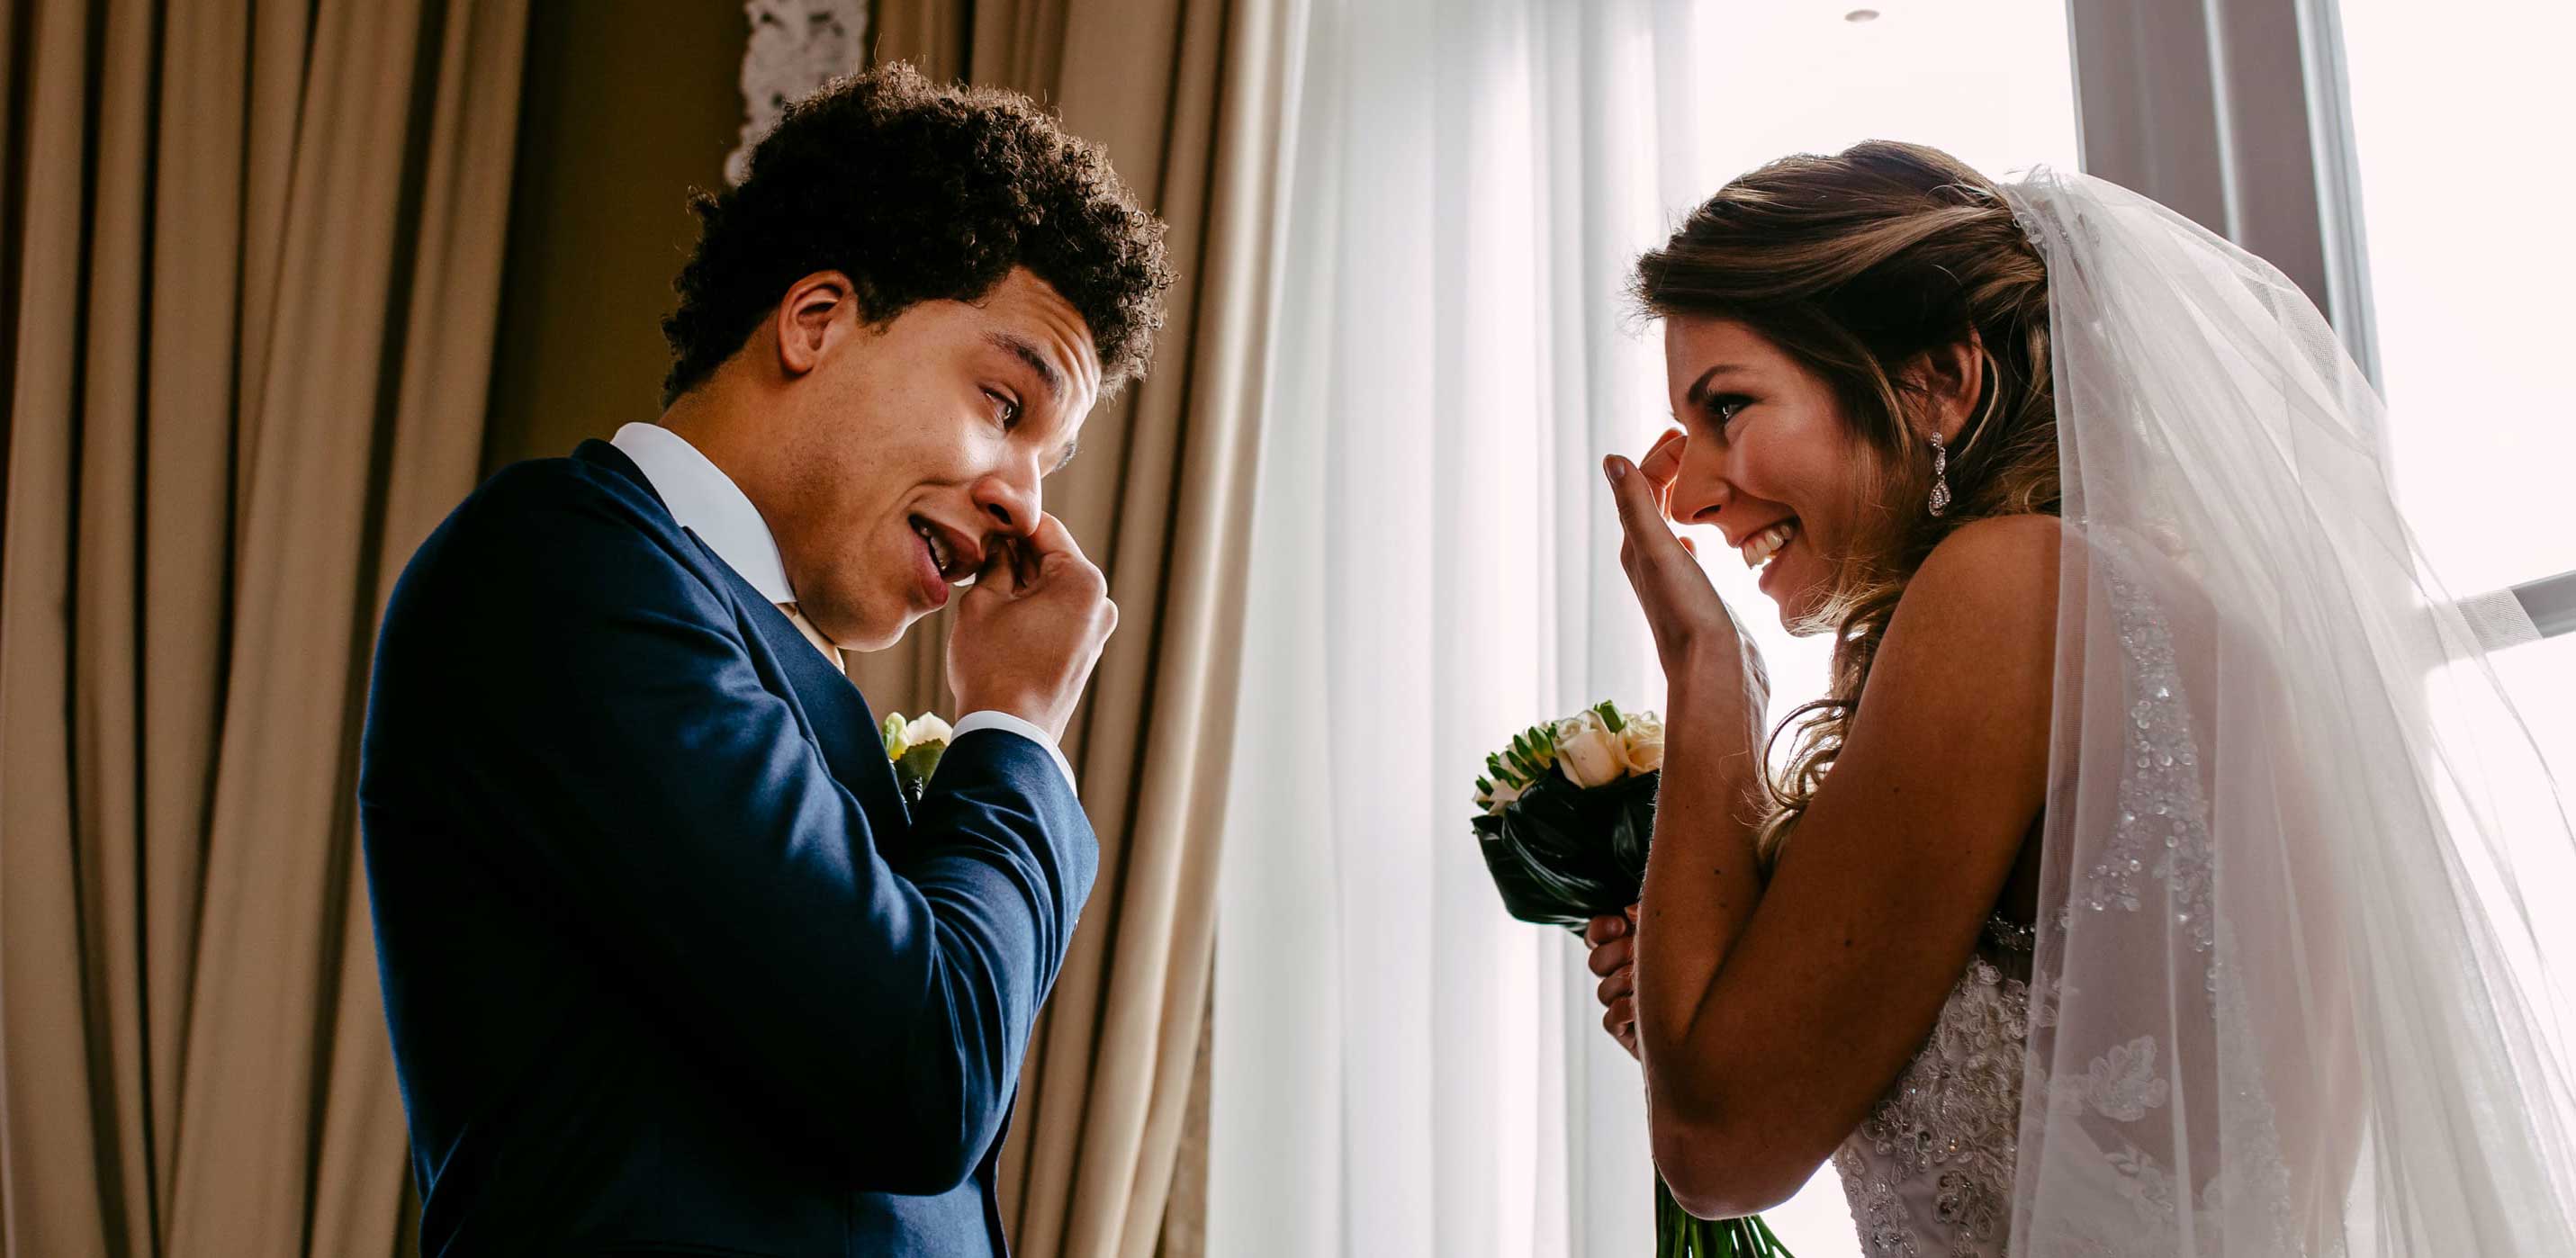 A bride and groom having a light-hearted moment in front of a window, captured by a wedding photographer.